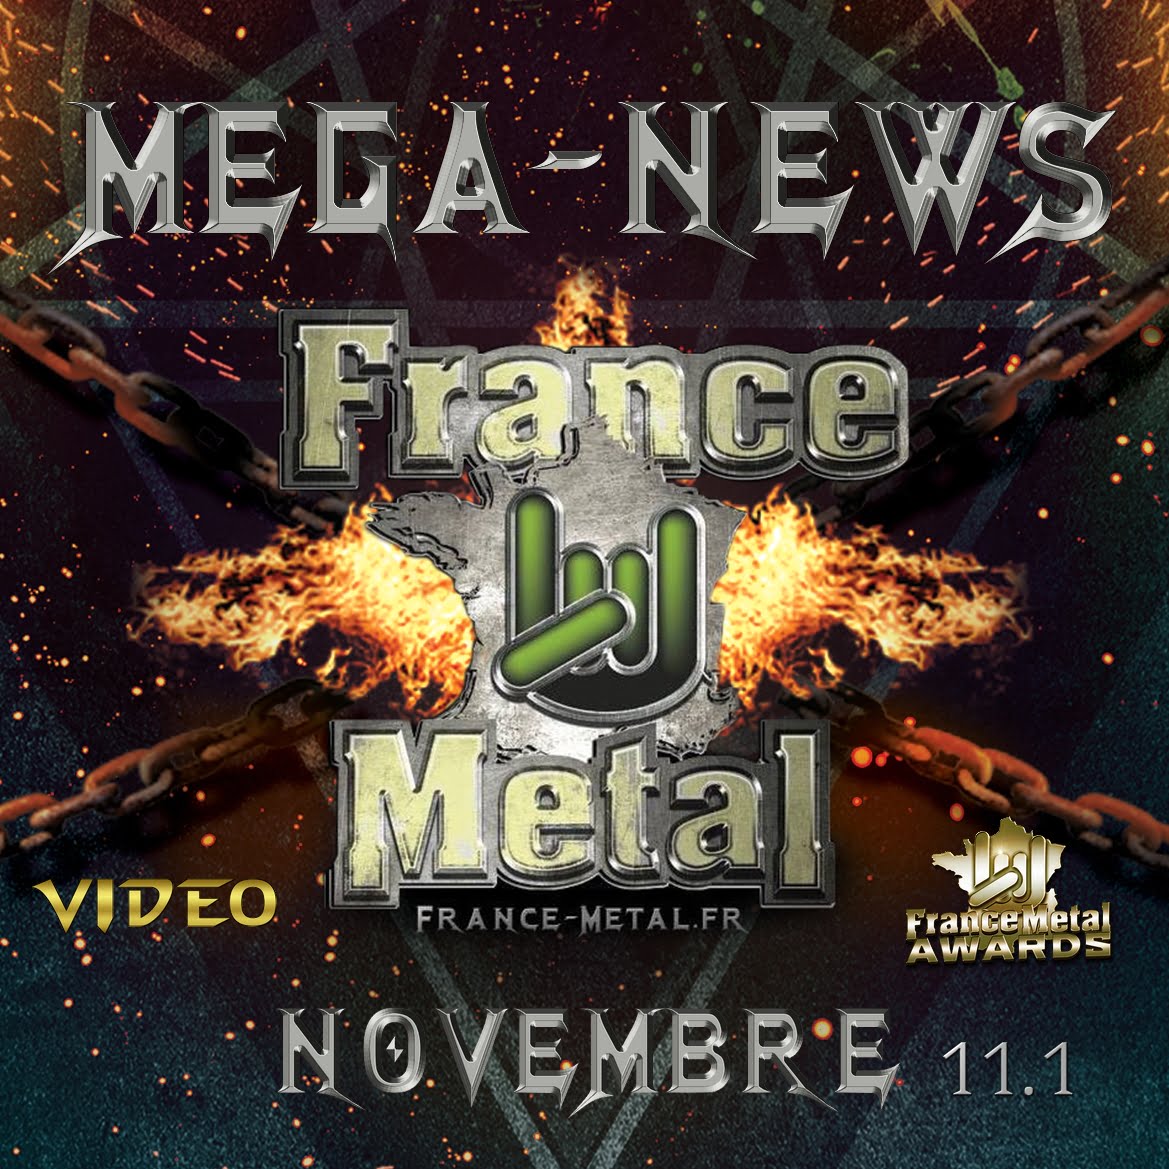 You are currently viewing MEGA-NEWS – Novembre 2020 – Video 11.1